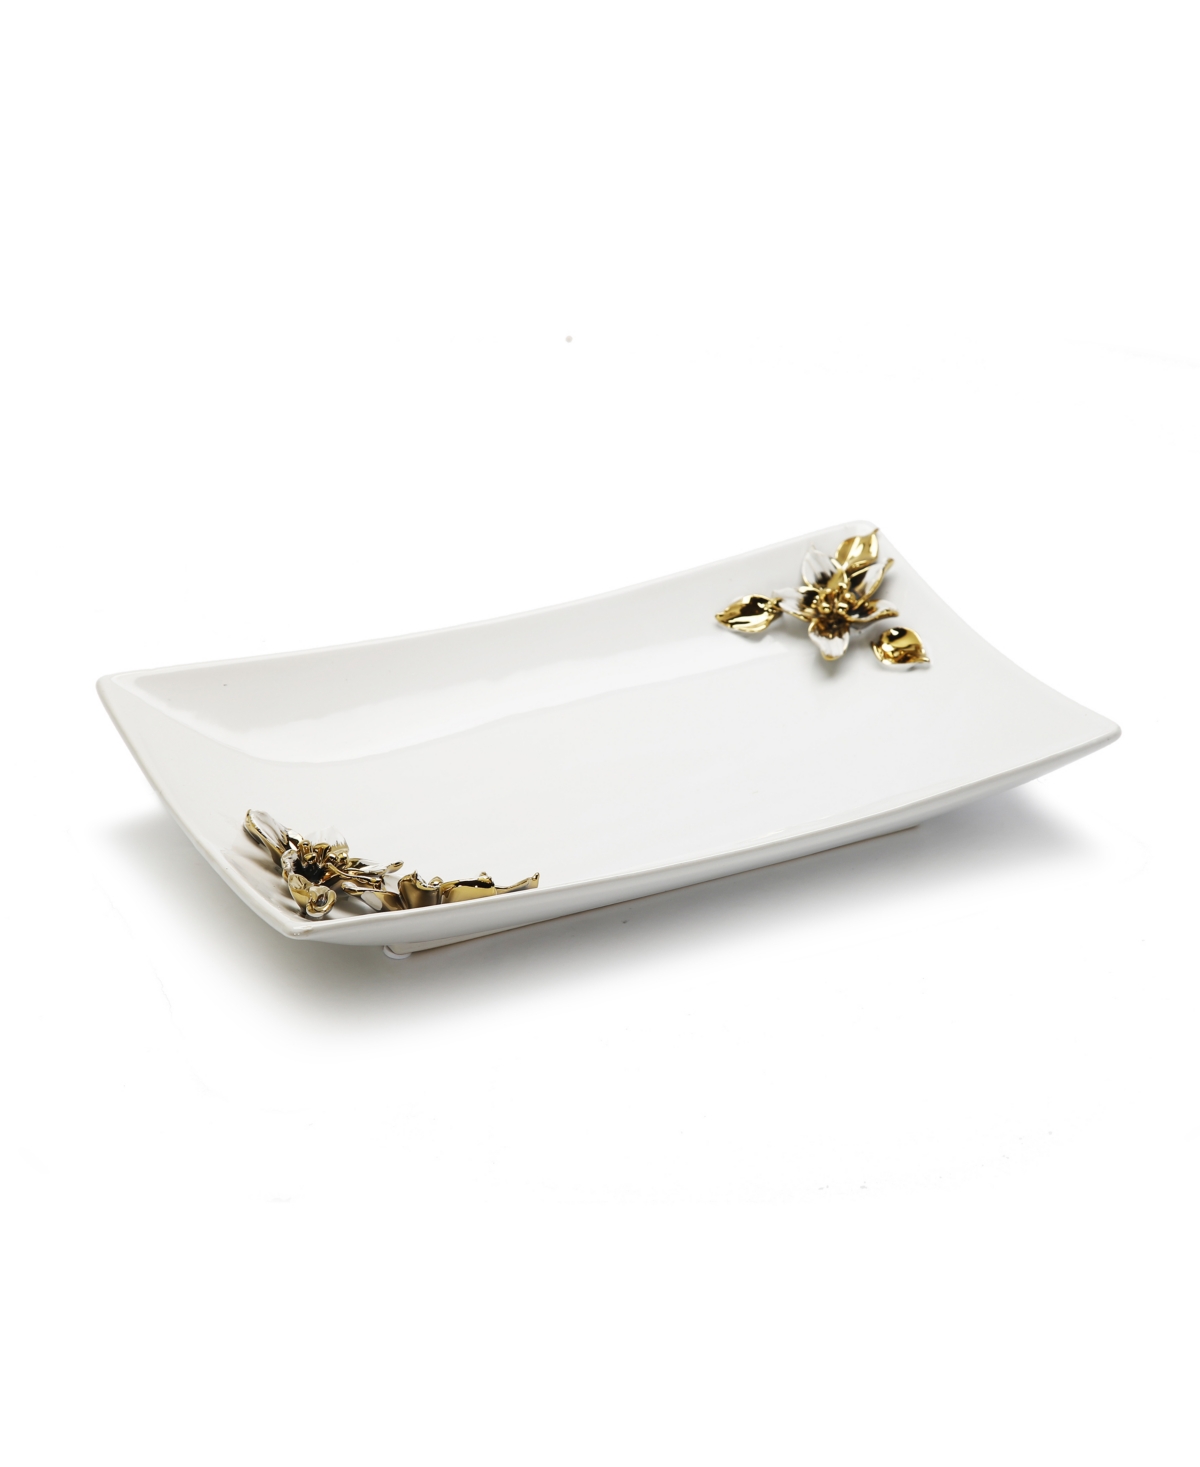 Porcelain Tray with Gold-Tone and White Flower on Handles - White, Gold